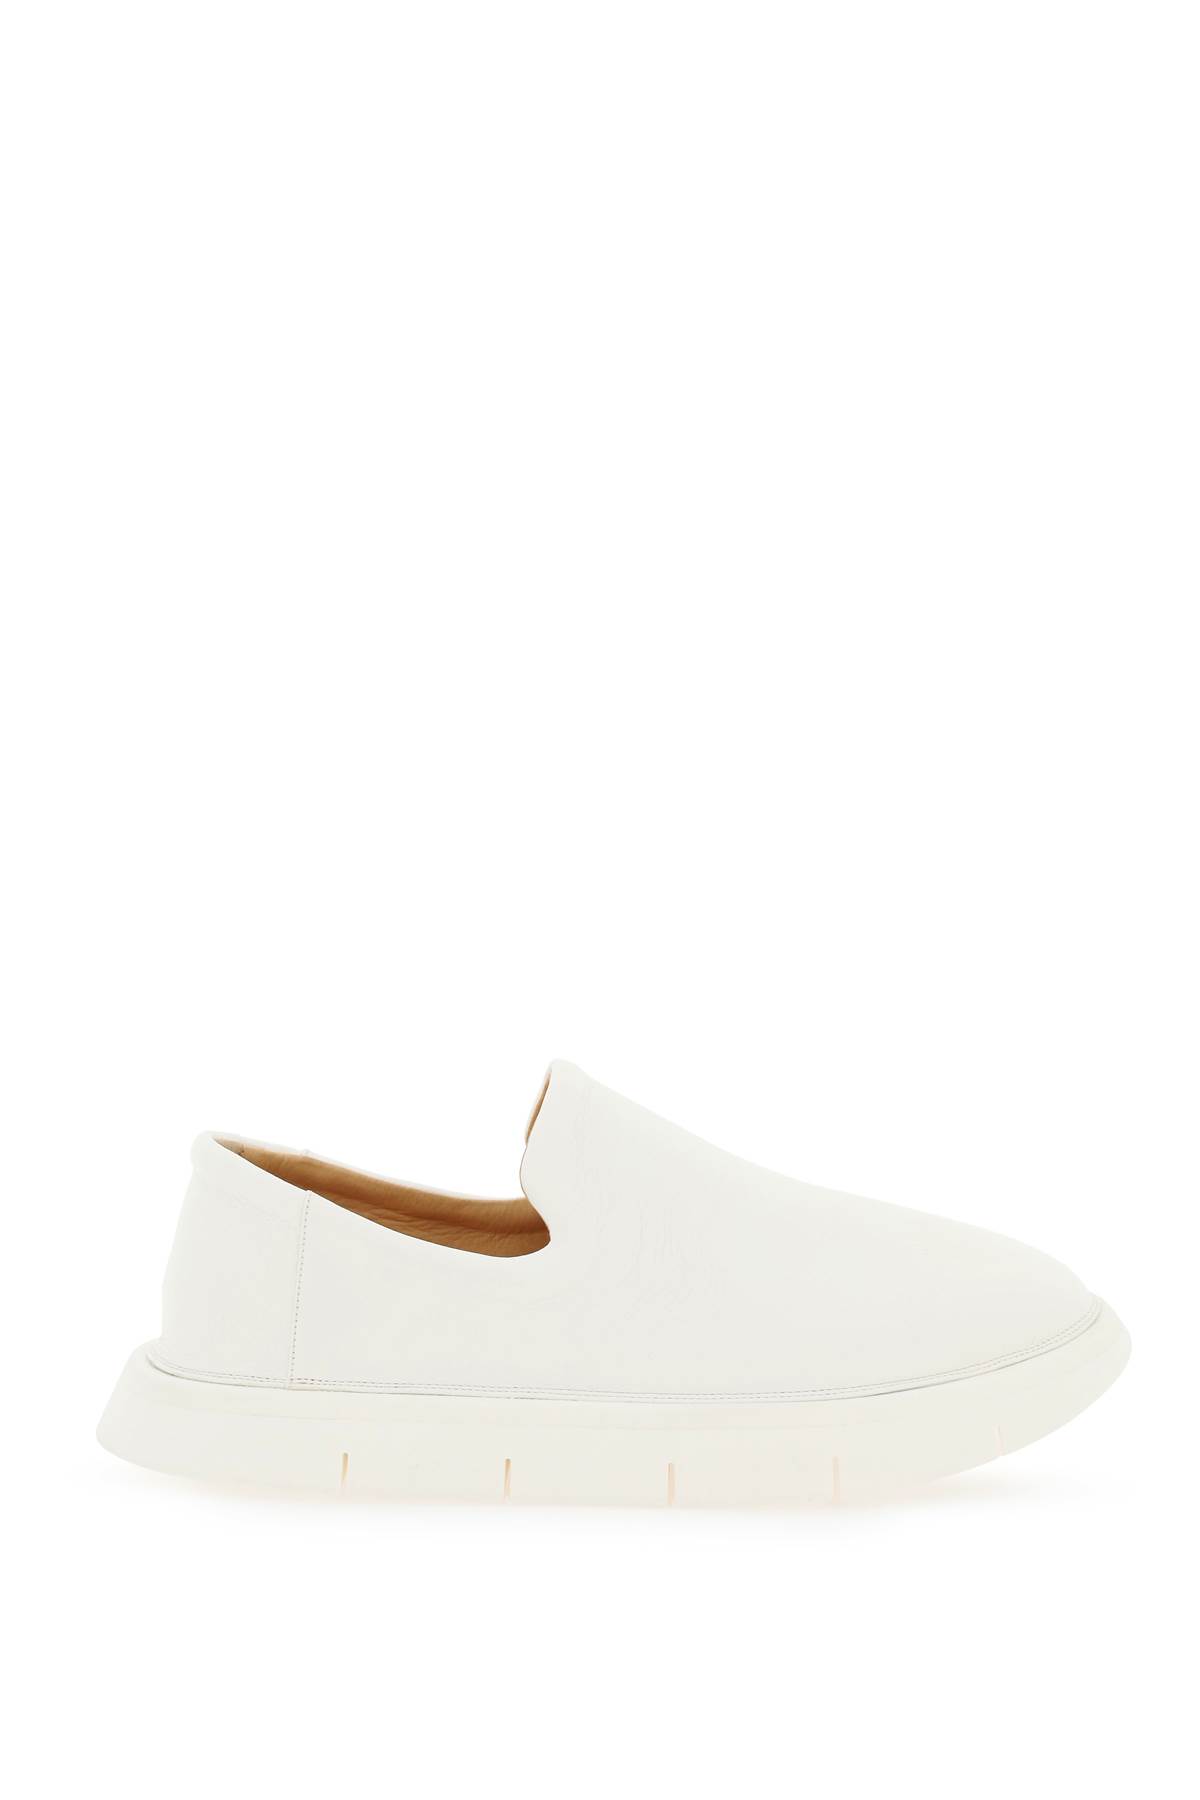 Marsell intagliata Grained Leather Slip-on Shoes